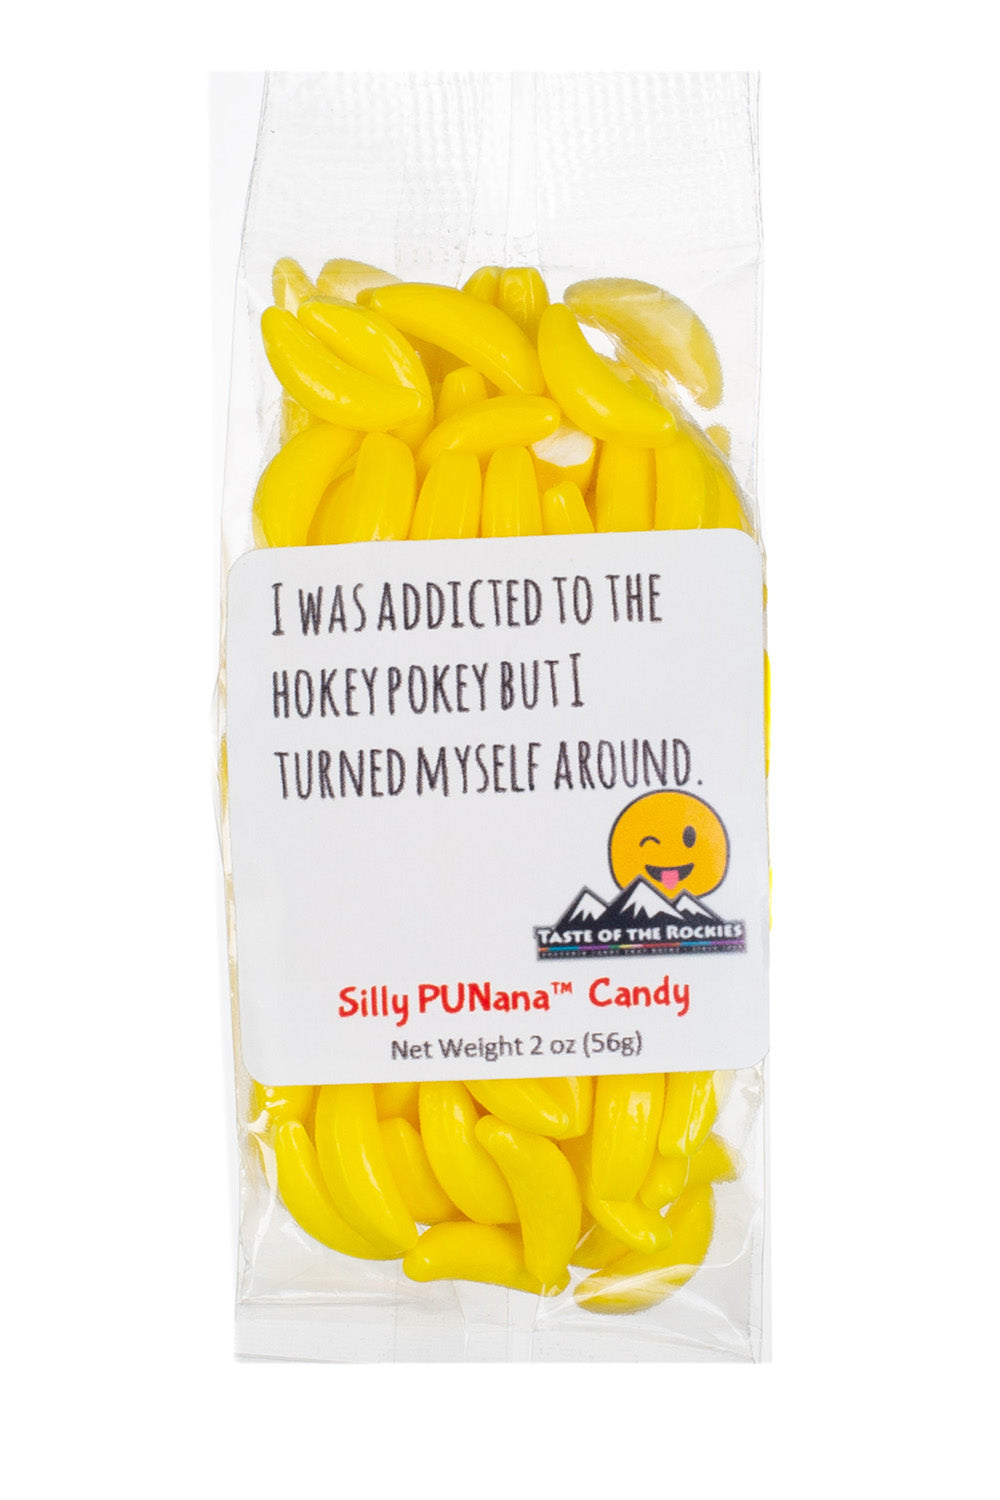 Silly PUNanas: Hilarious Puns, Delicious Candy